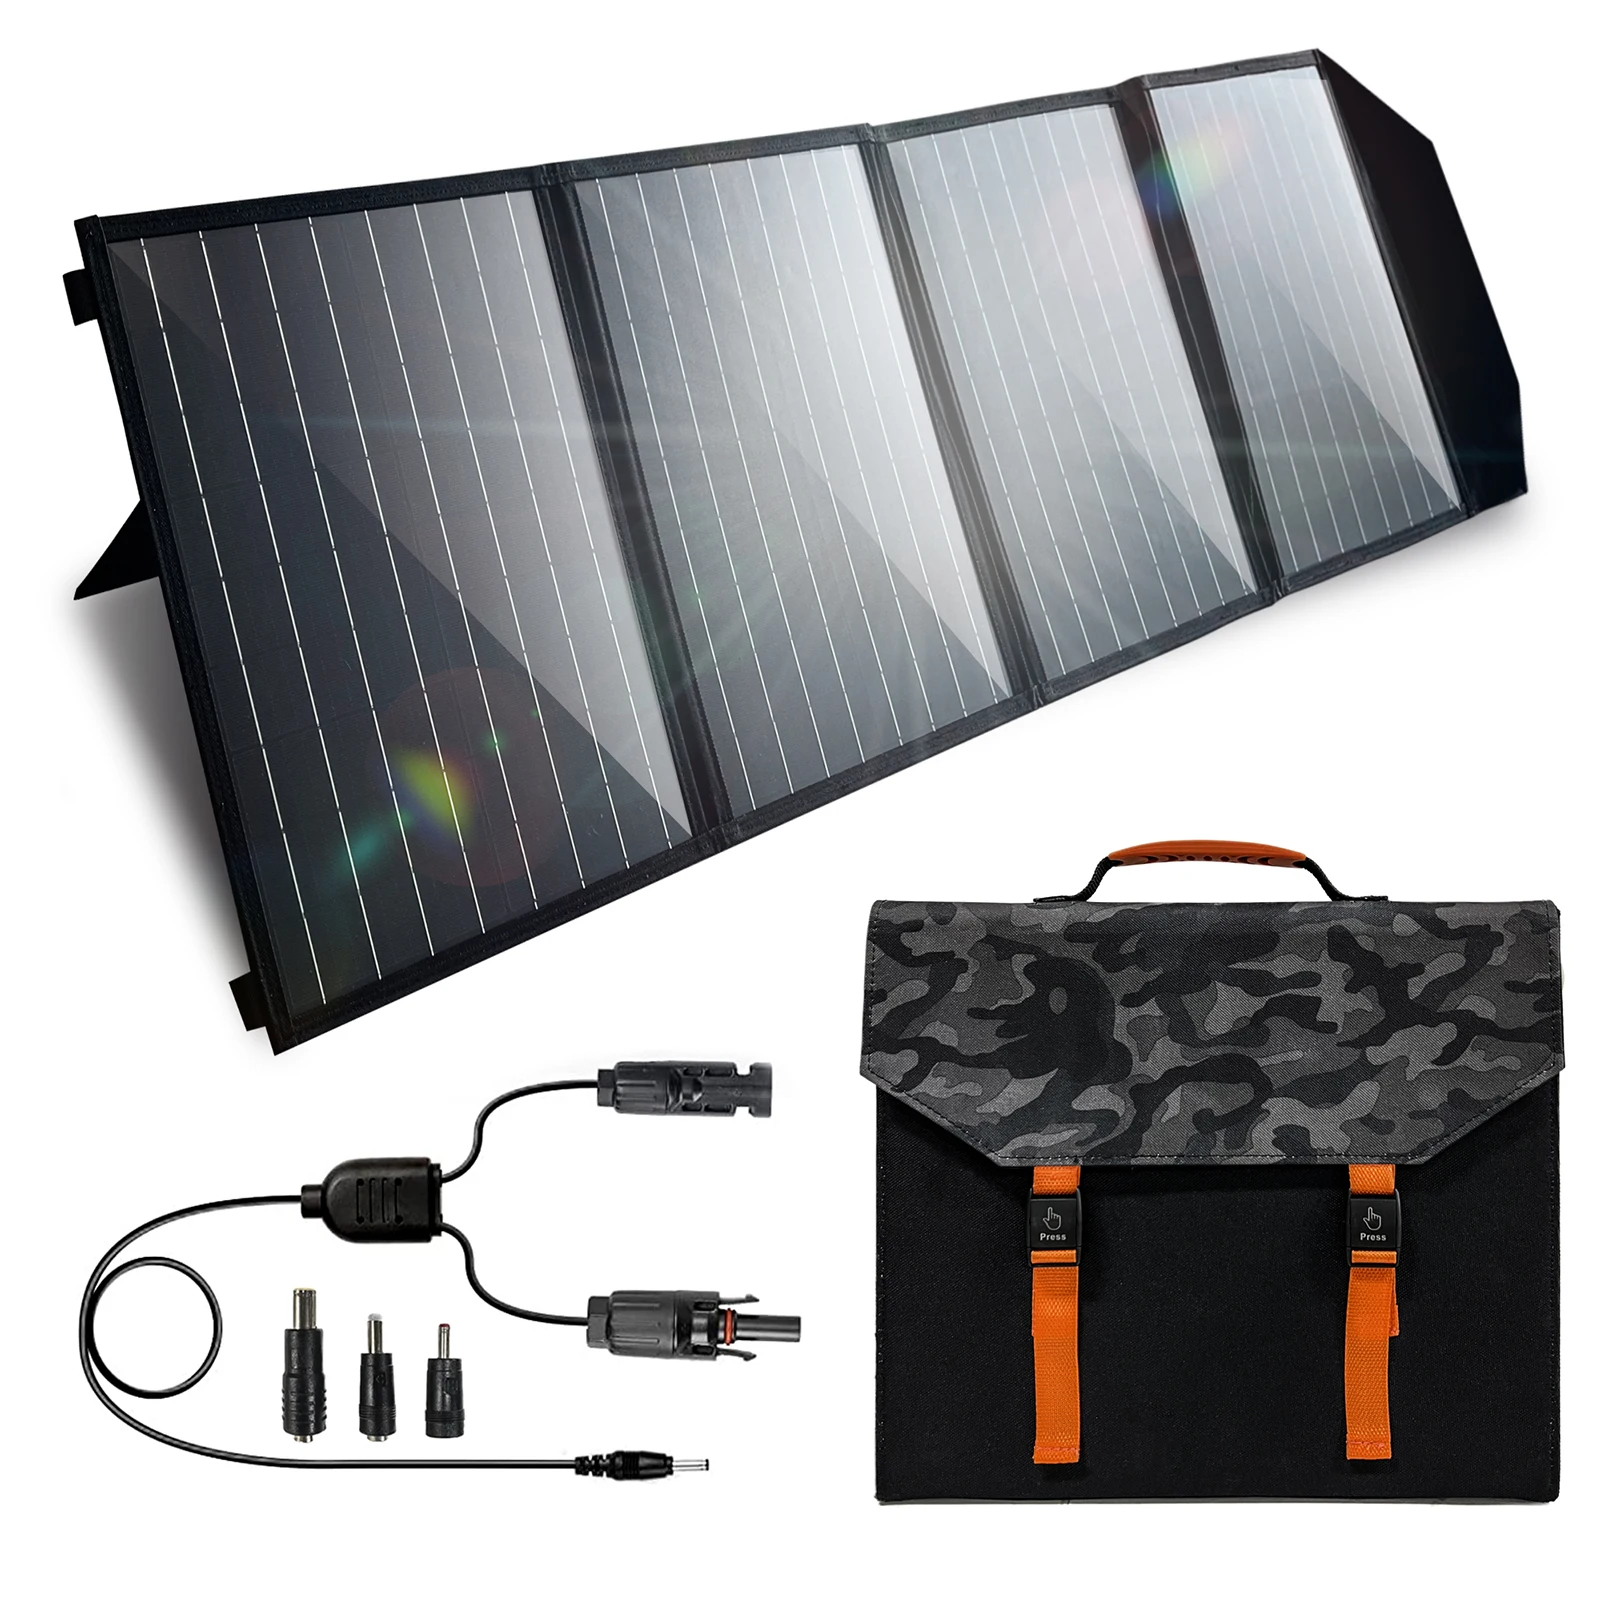 

Solar Panel 100W 18V Portable Foldable Solar Panel Solar Charger Emergency Power Survival Toos for Outdoor Camping Traveling